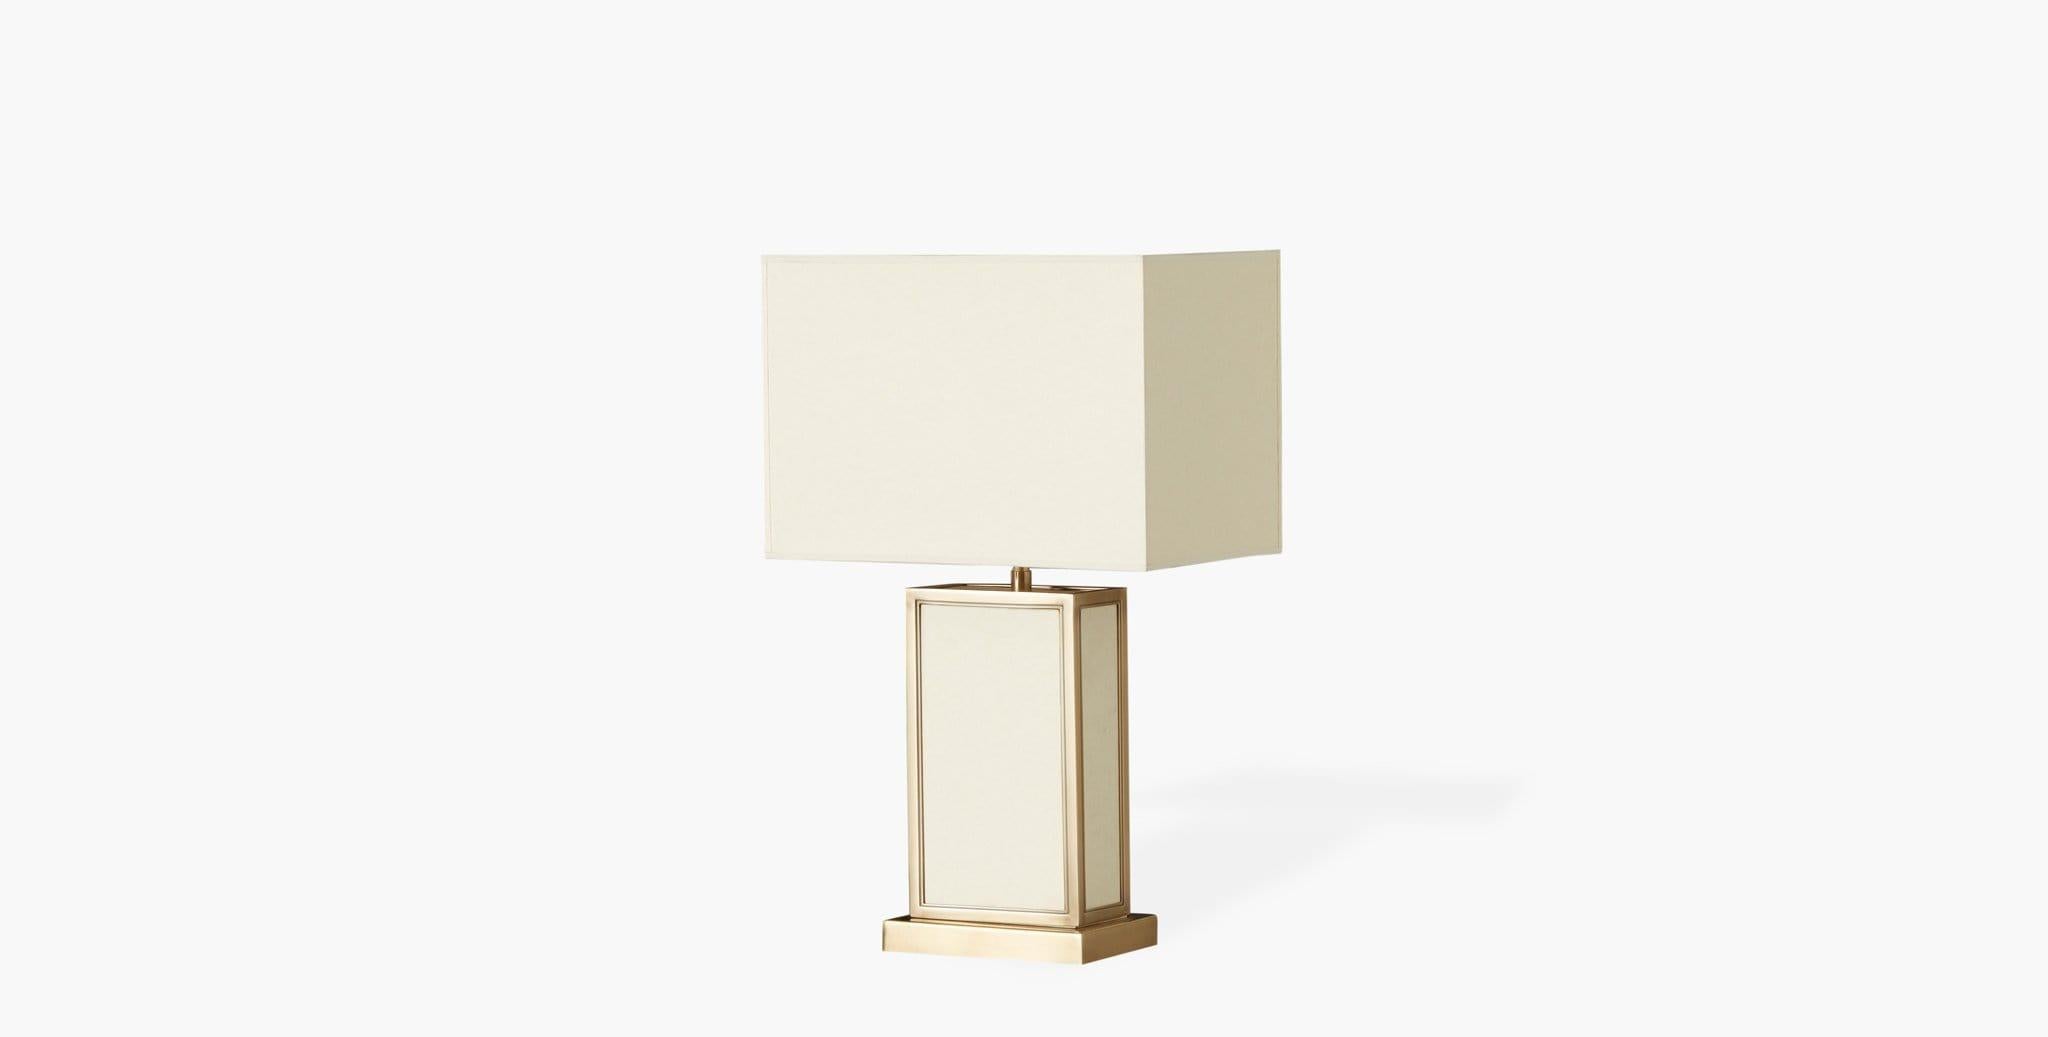 The Ivar Table Lamp radiates a soft, luminous glow that is balanced by the natural tones of its shade and base. Our handcrafted finishes are inspired by variations within natural textures. Each selection is slightly unique.

Parchment